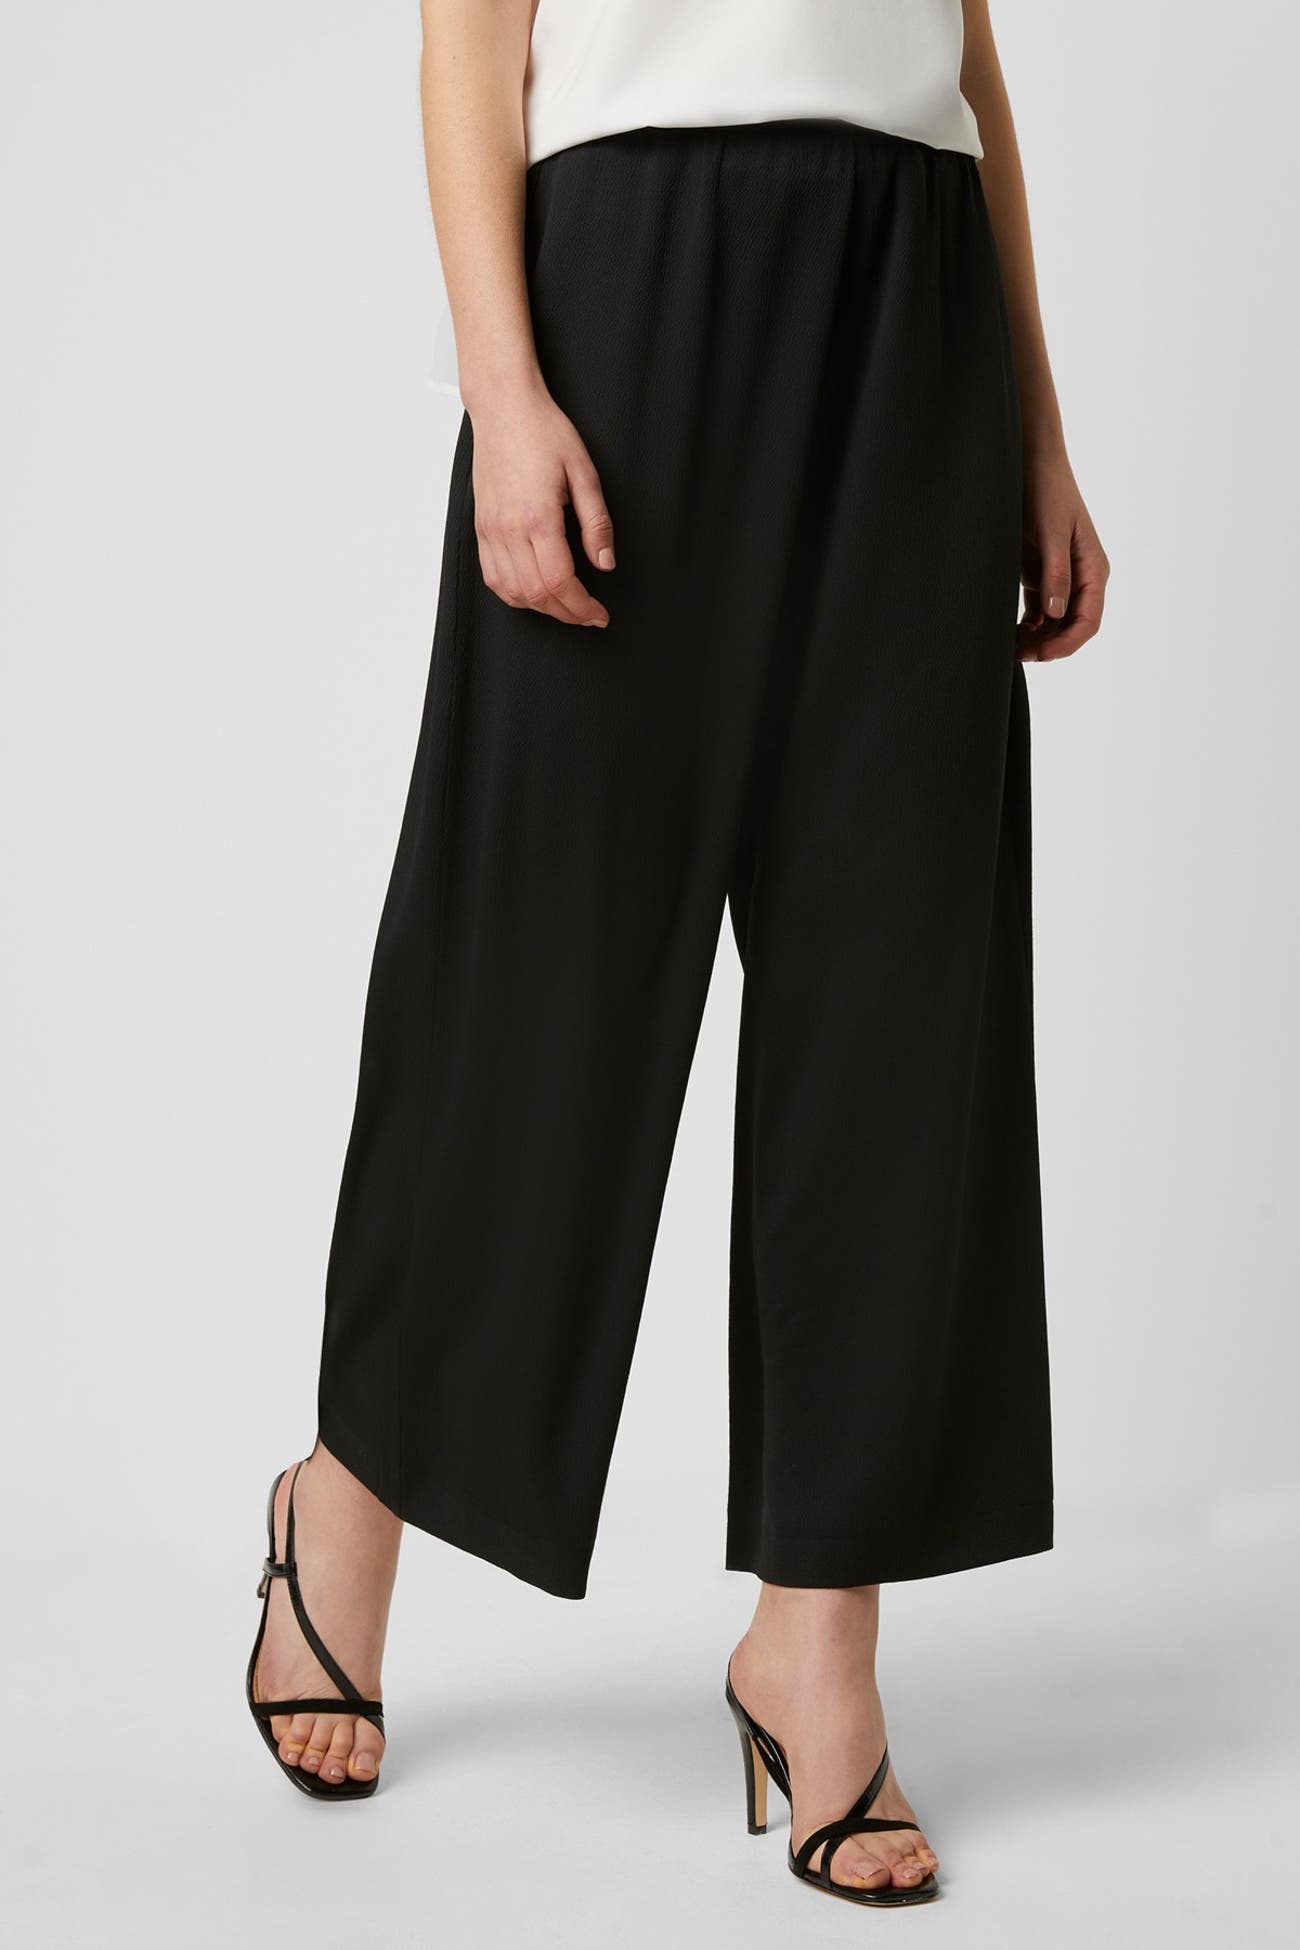 French Connection | Alessia High Waisted Culotte Pants | Nordstrom Rack